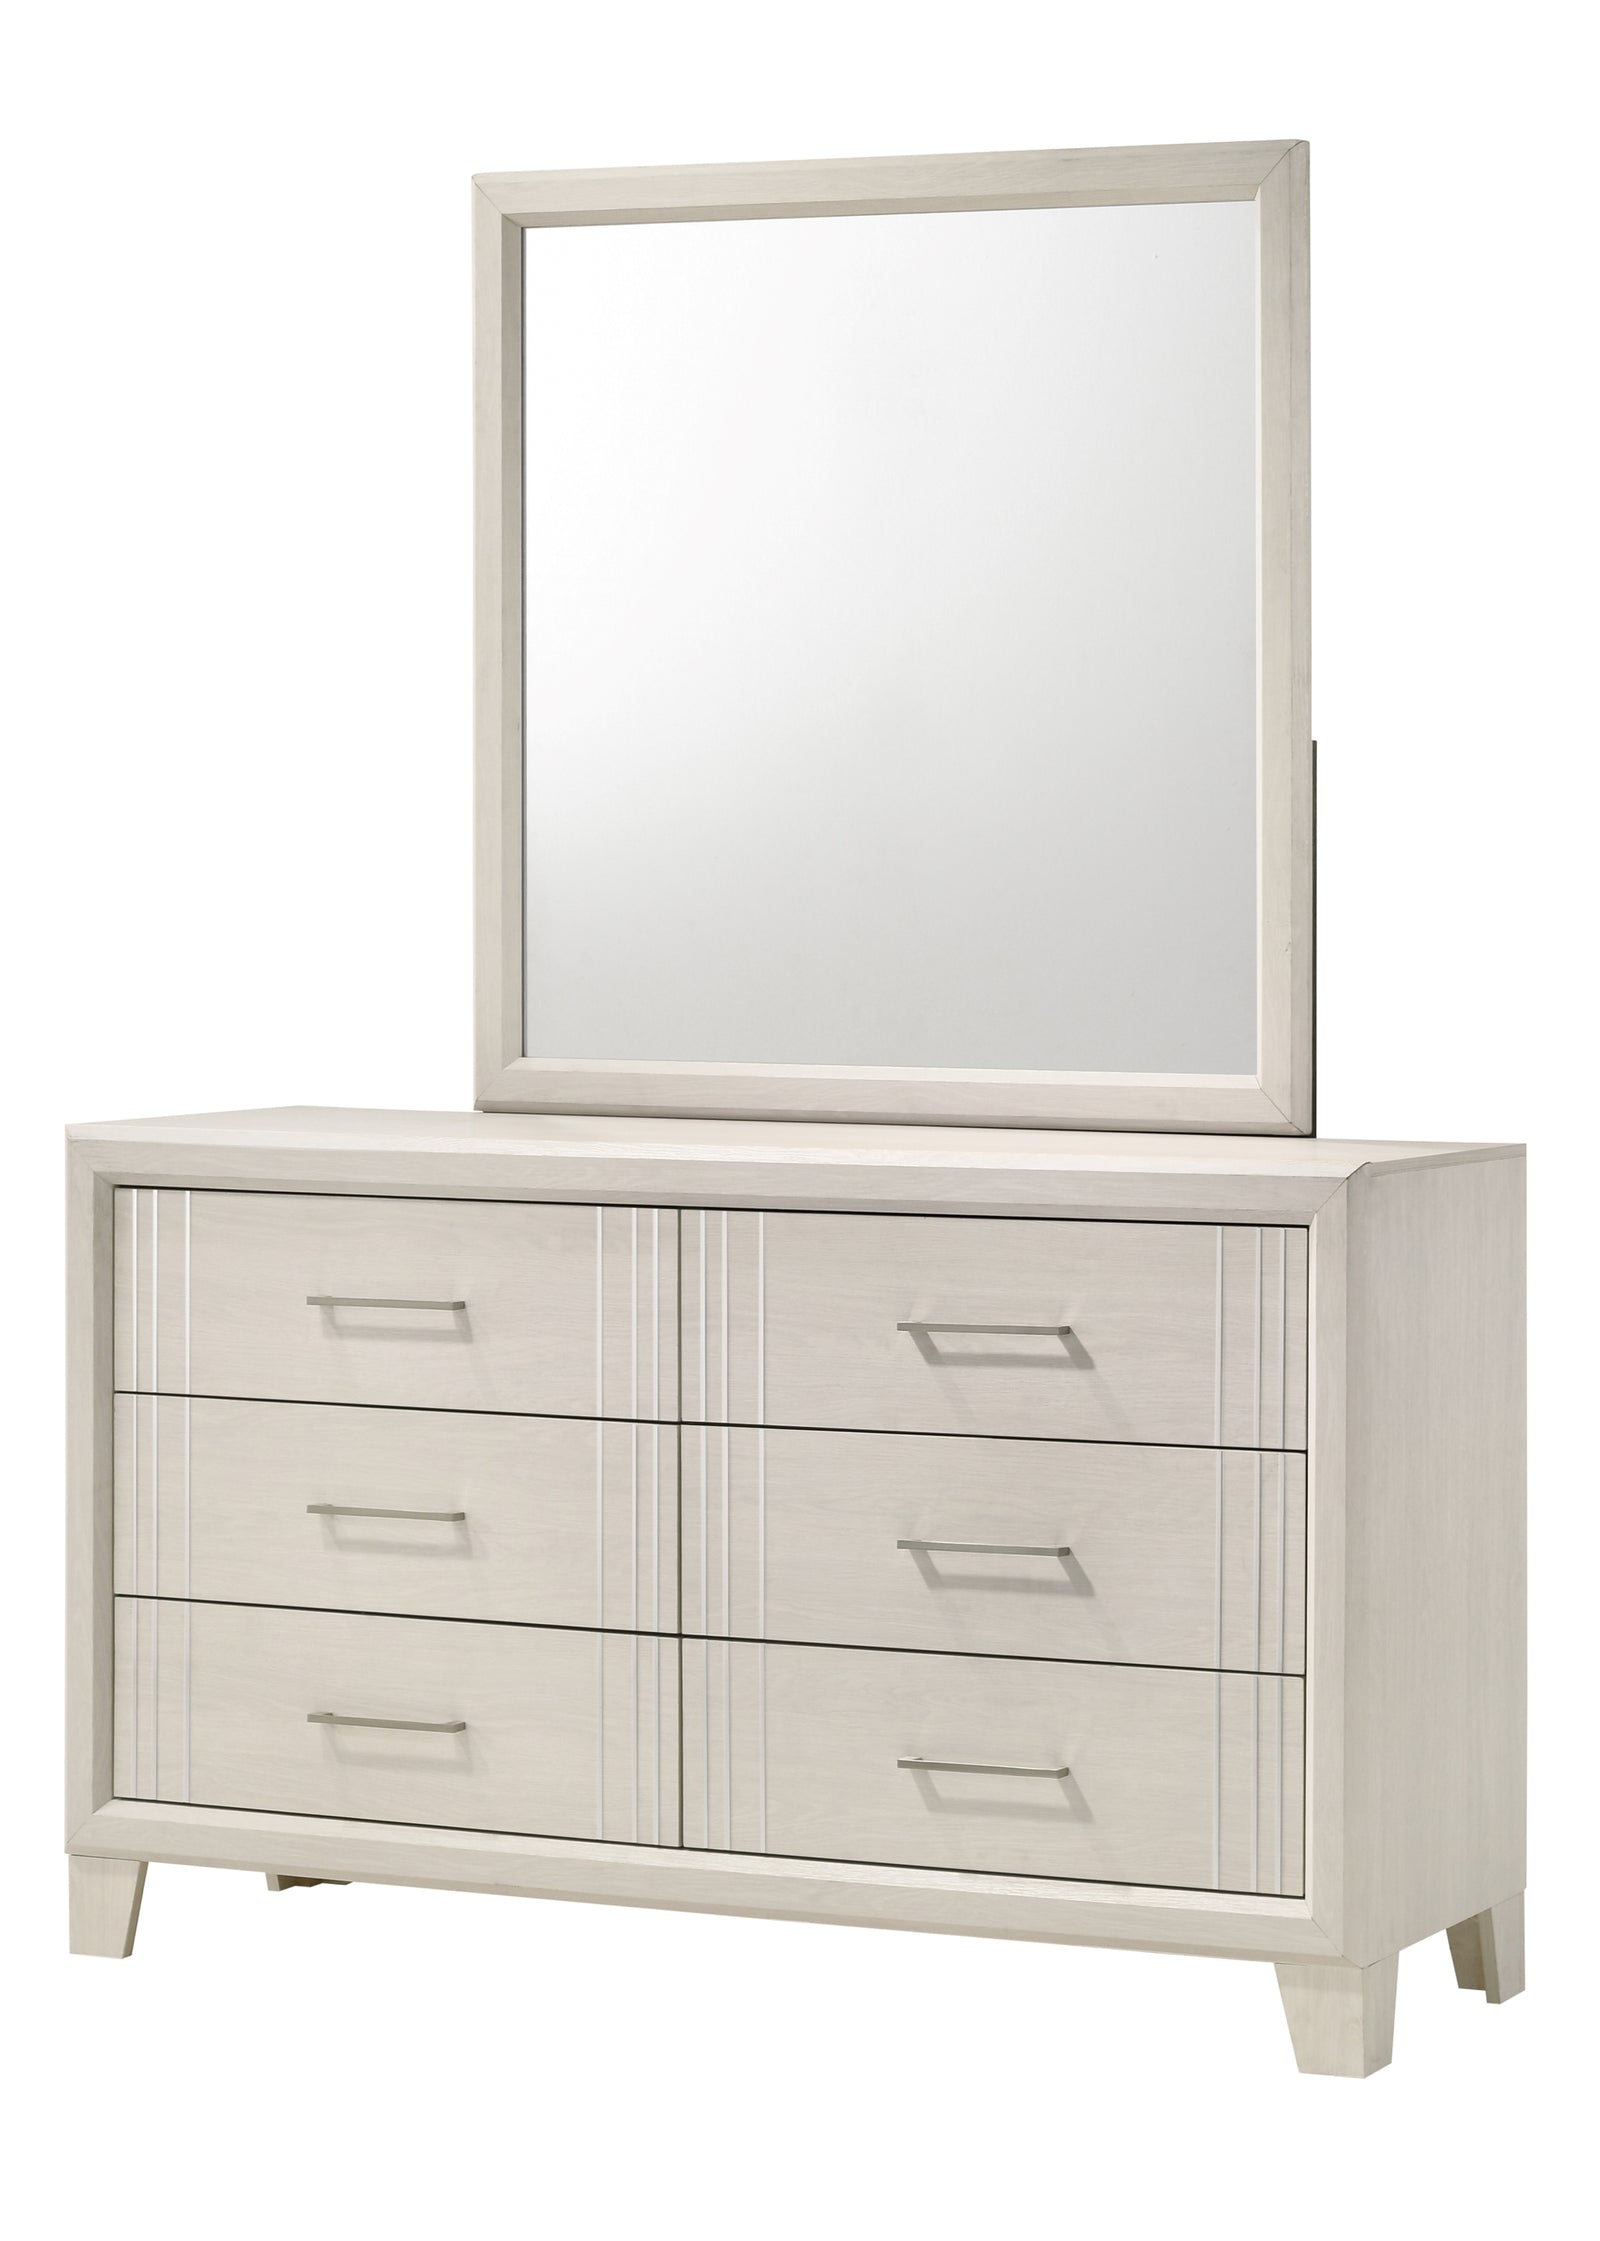 Charlie Cream Modern Contemporary Solid Wood And Veneers 6-Drawers Dresser